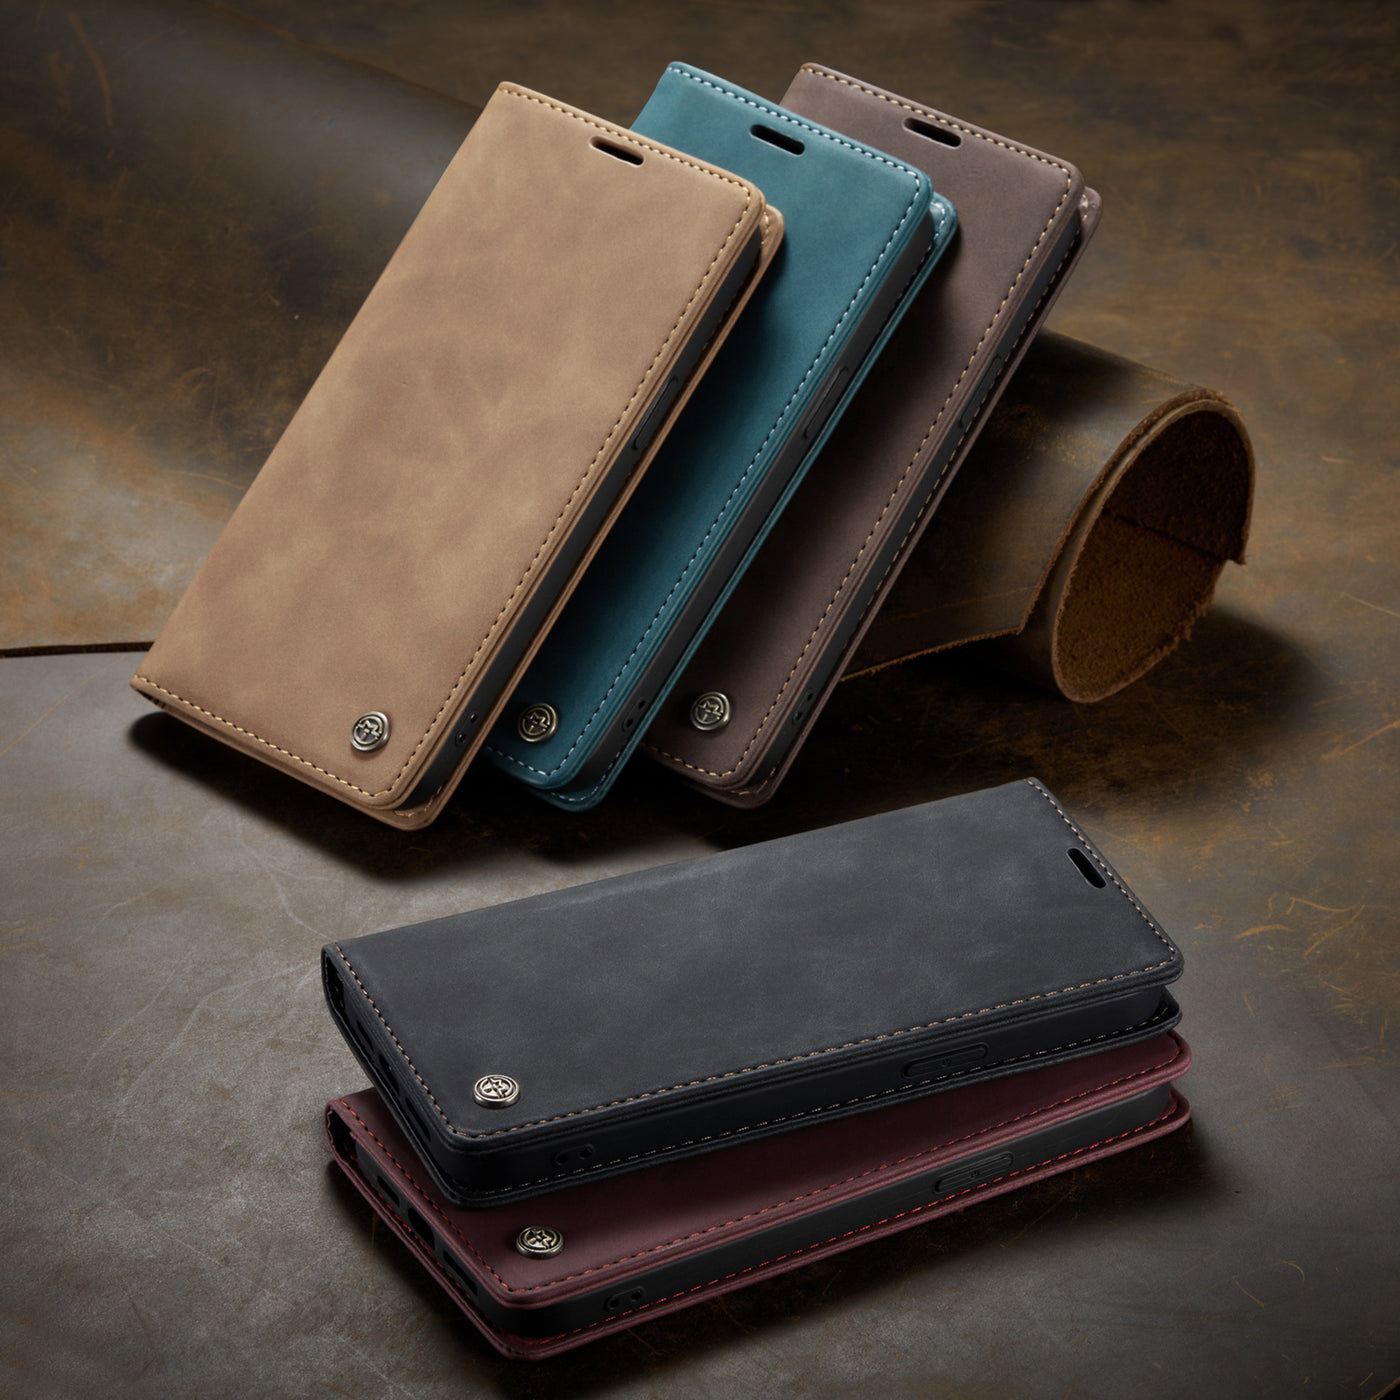 Retro Series Leather Wallet Flip Cases And Covers